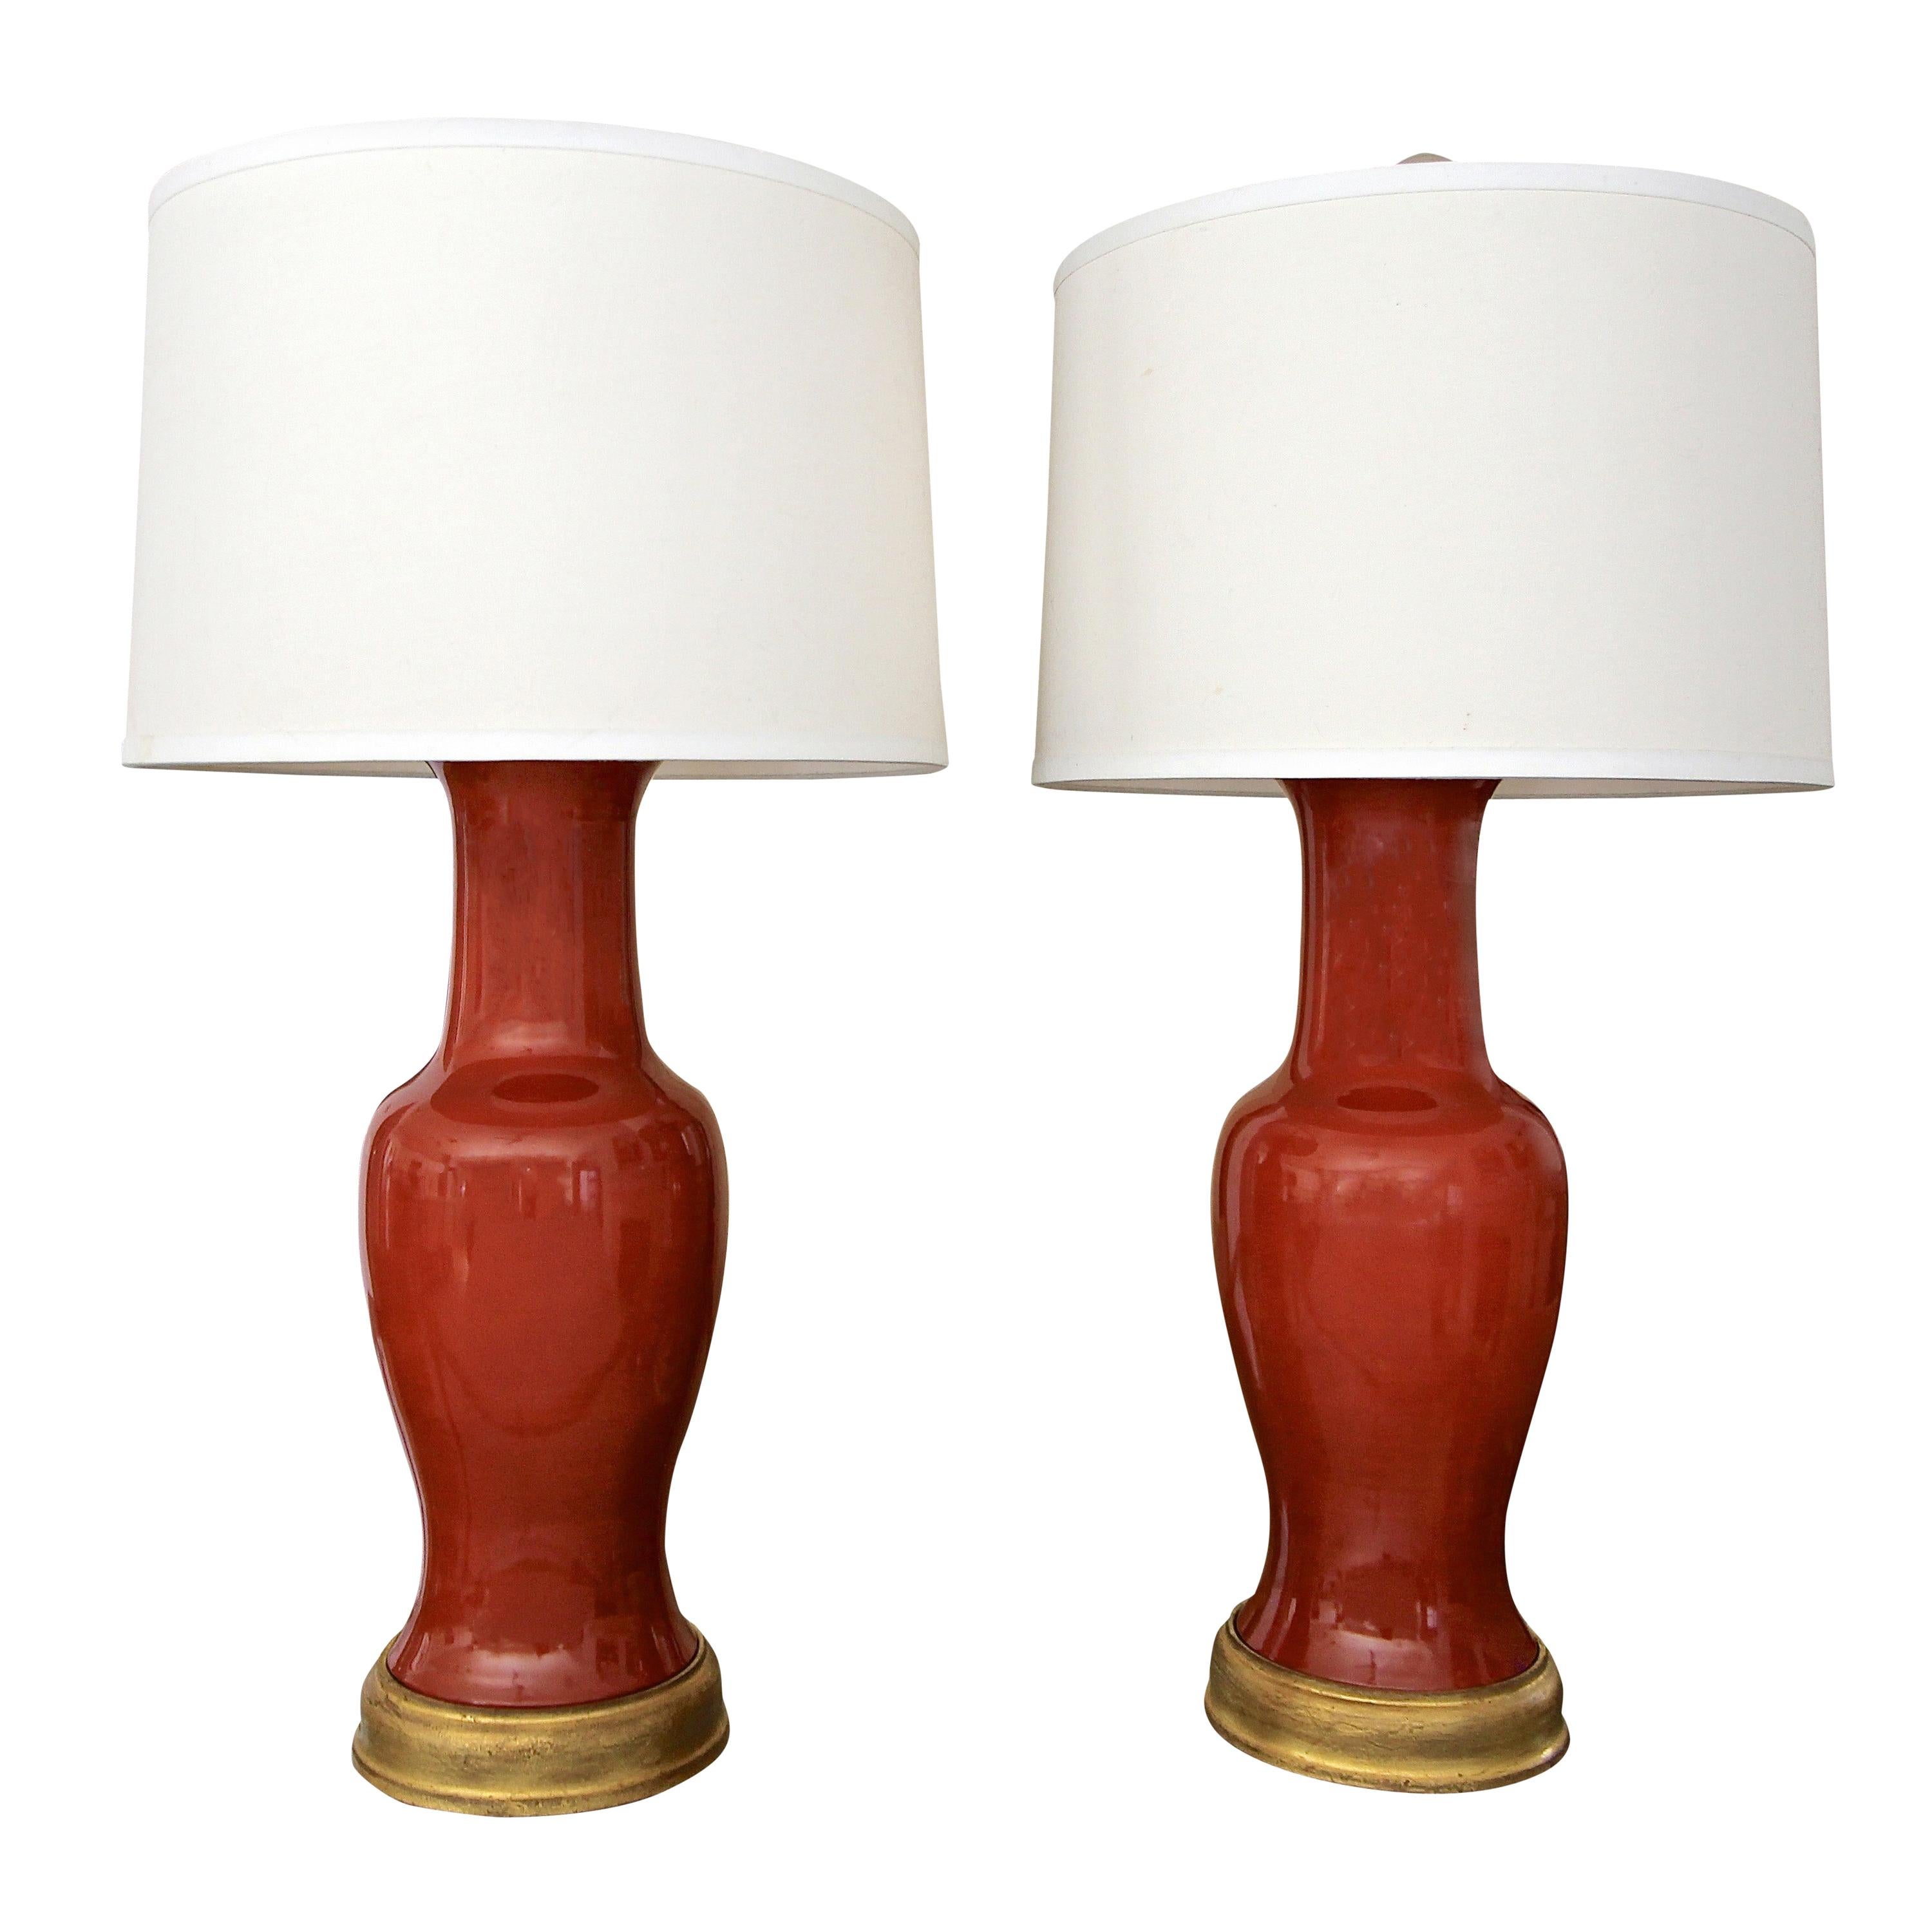 Large Pair of Chinese Burnt Orange Porcelain Table Lamps